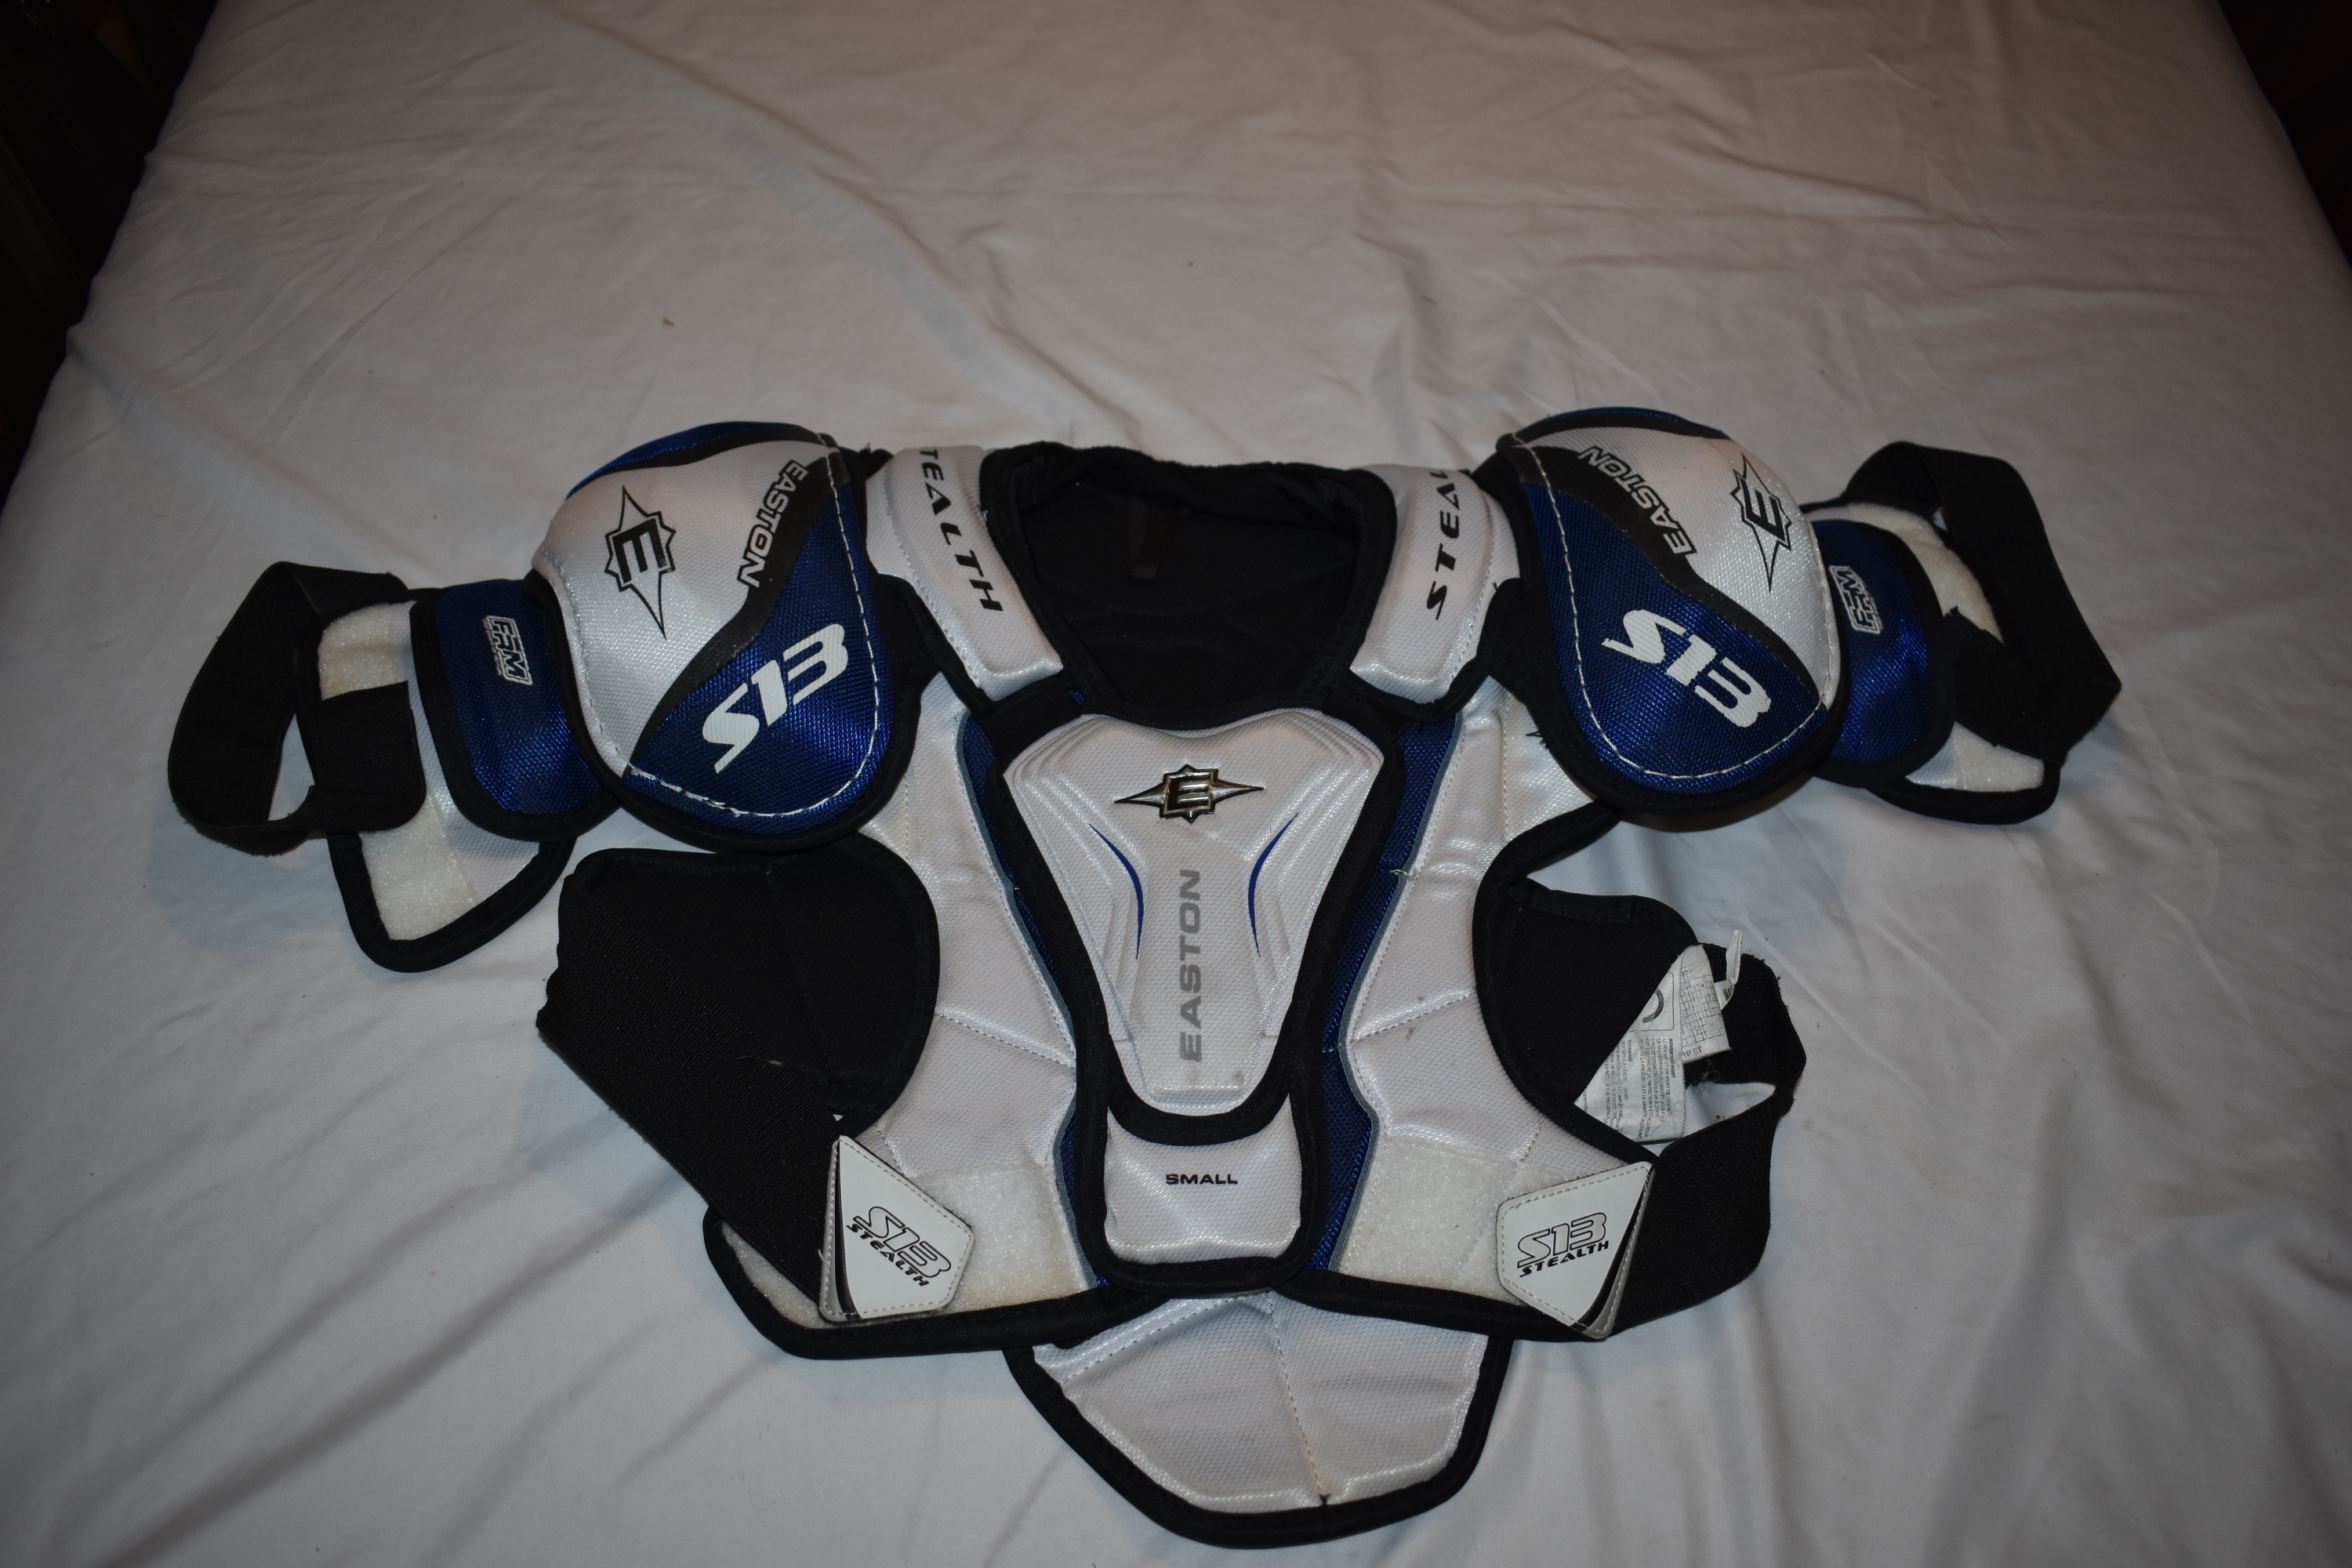 Easton Stealth S13 Hockey Shoulder Pads, Junior Small - Great Condition!